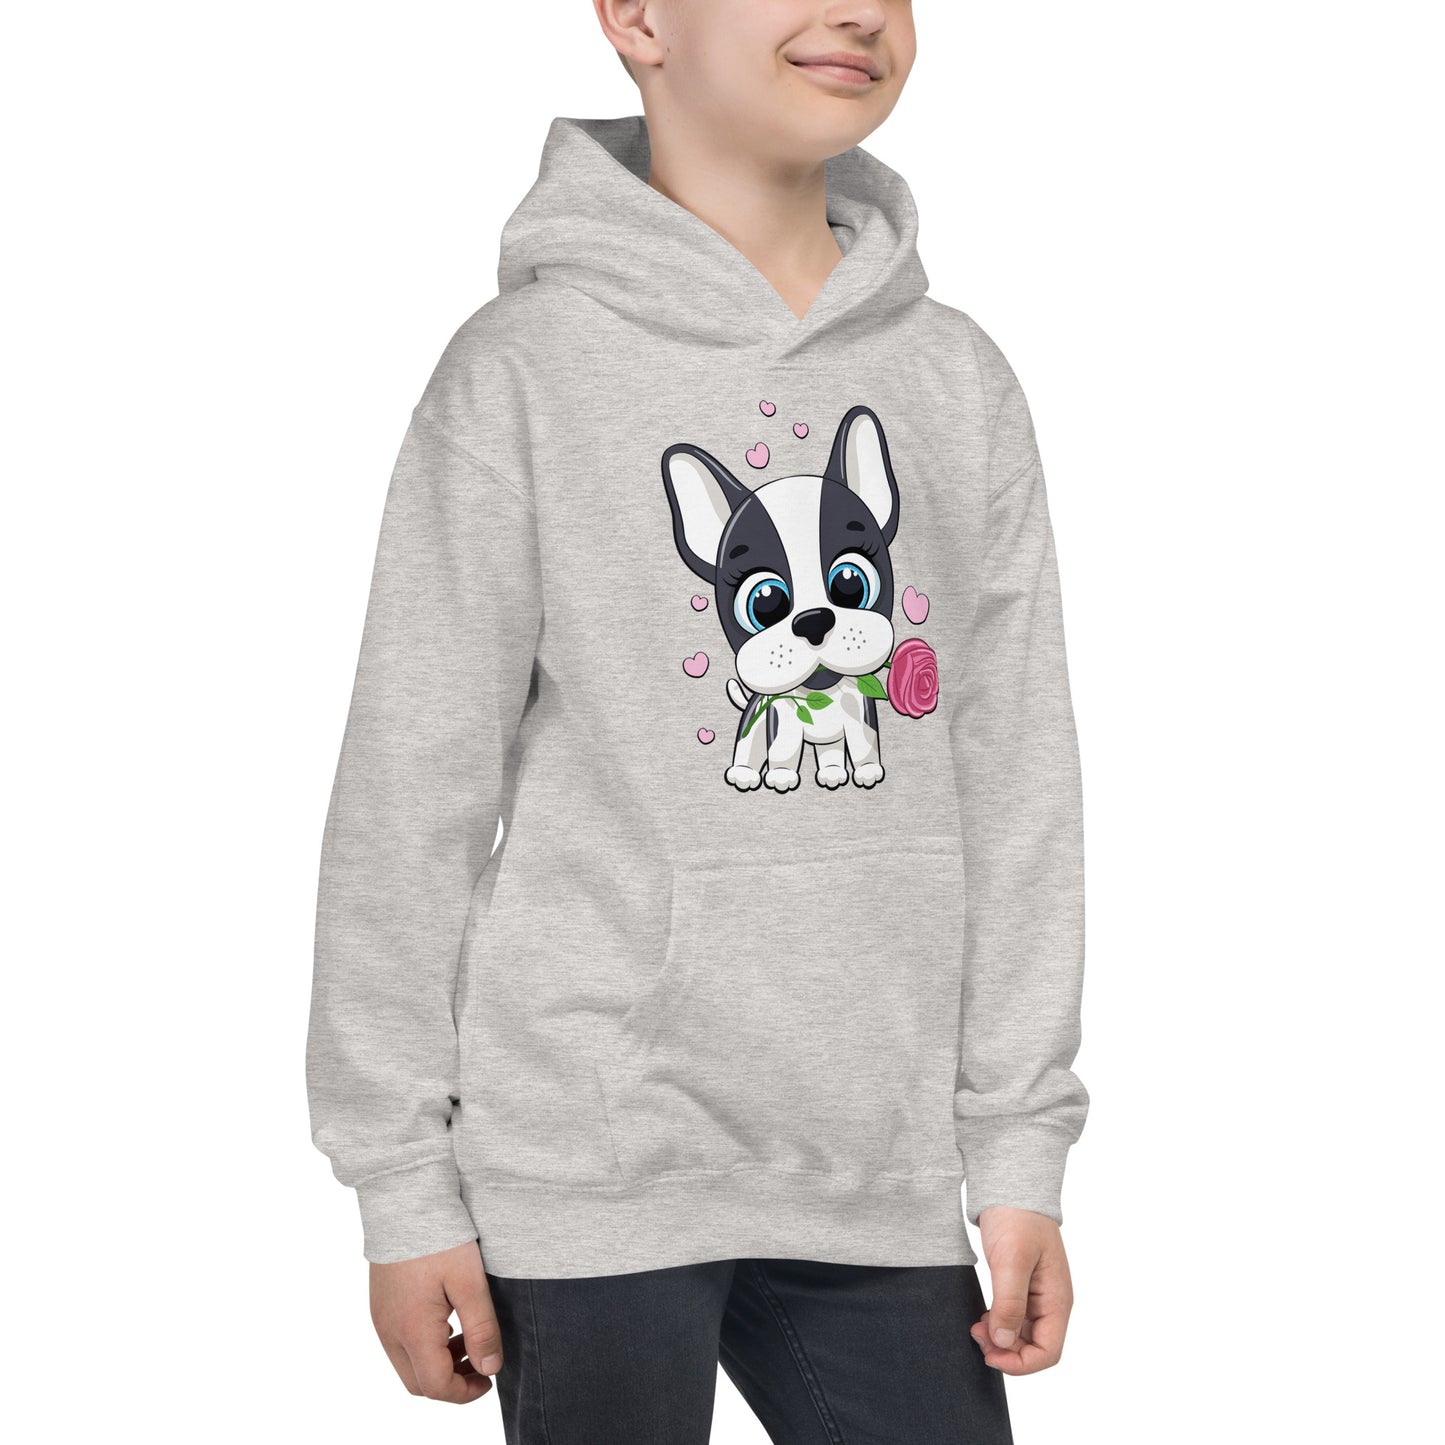 Lovely Puppy Dog Holding Flower Hoodie, No. 0545